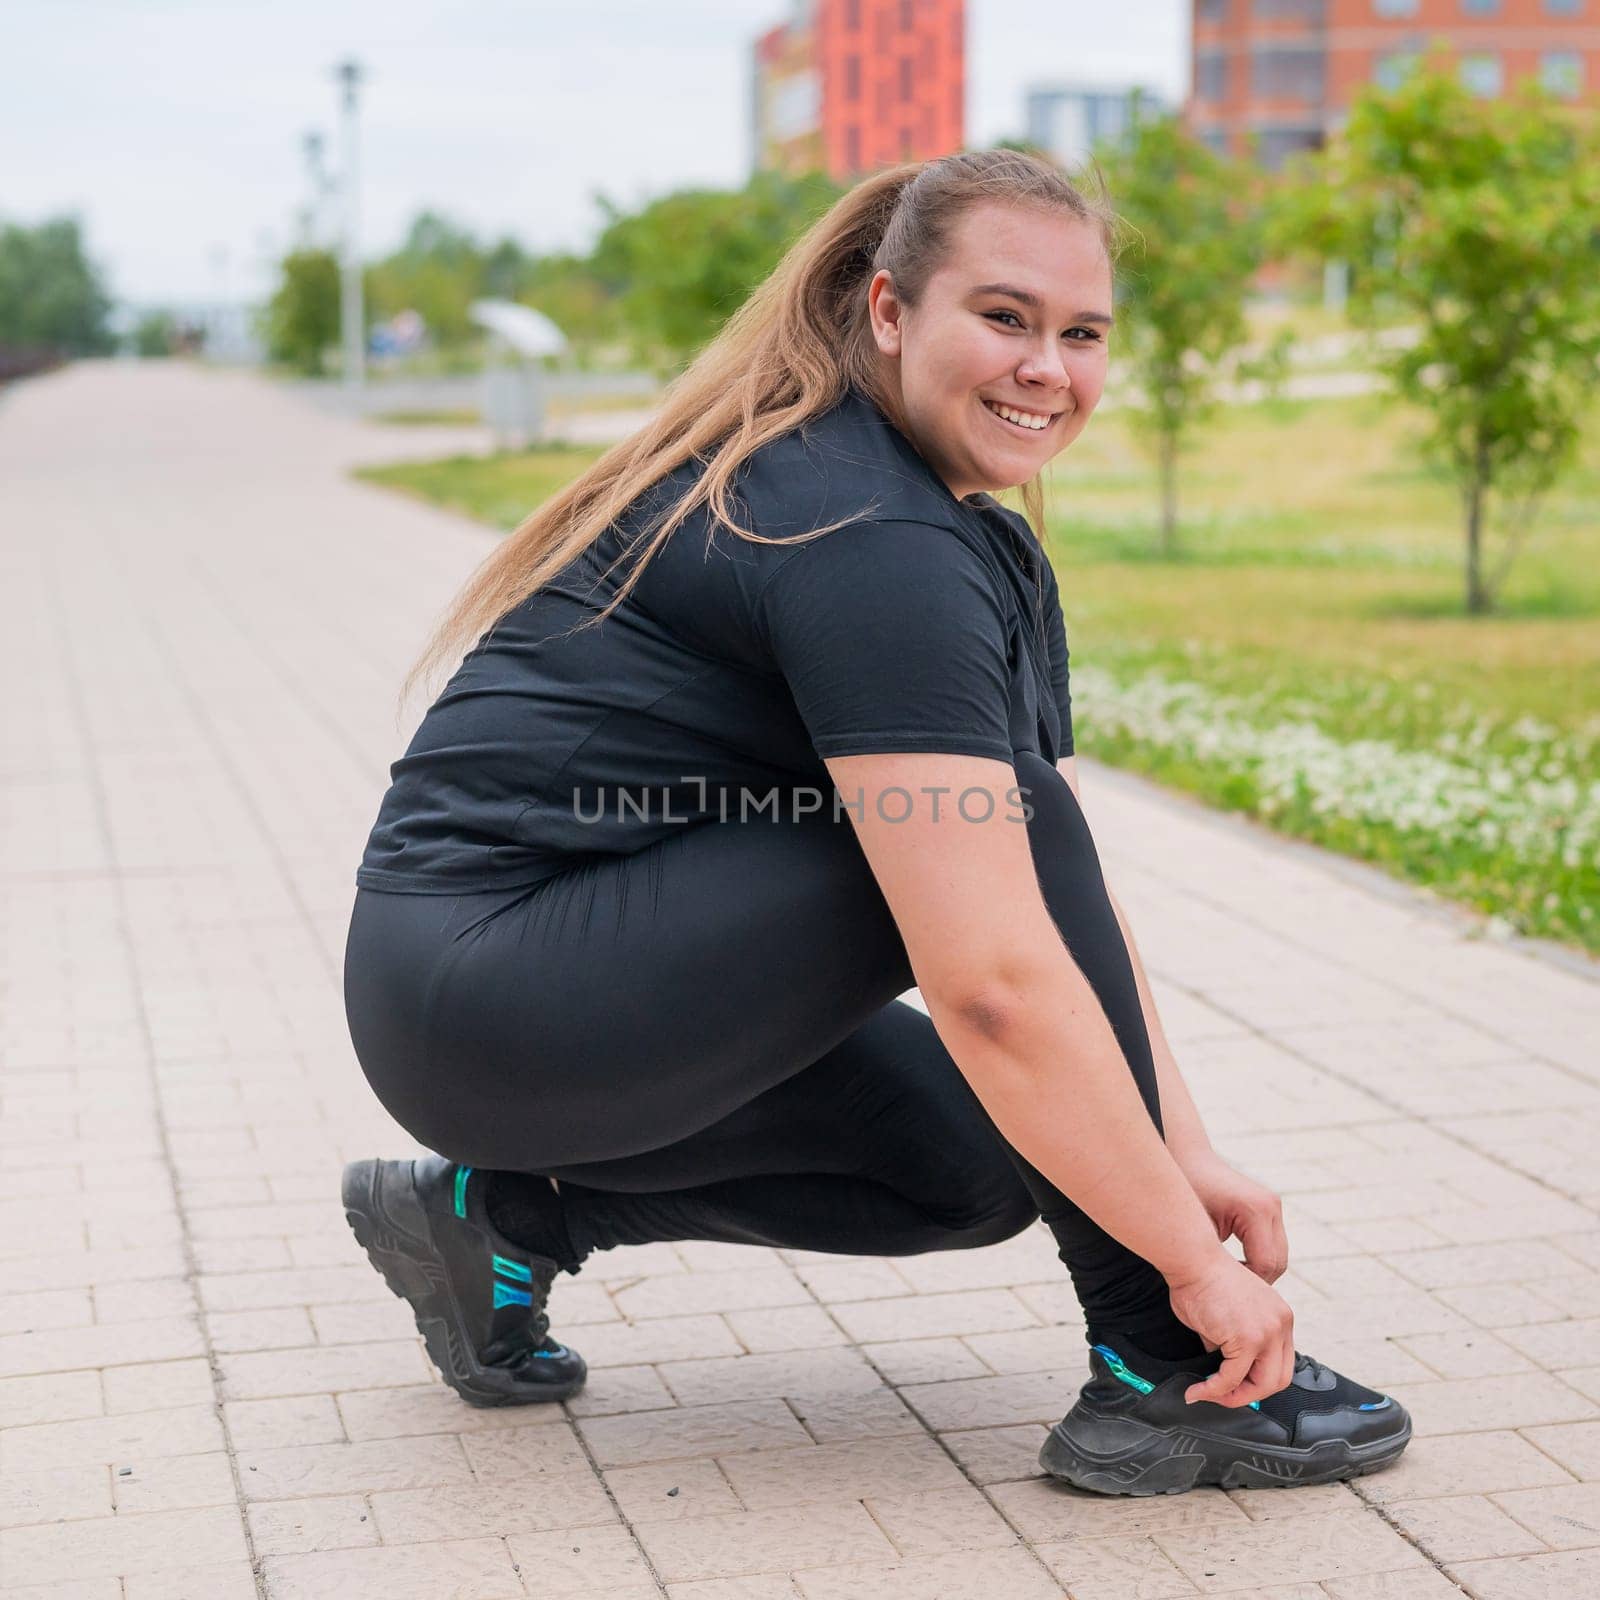 A fat woman in a tracksuit crouches down and ties her shoelaces outdoors. by mrwed54